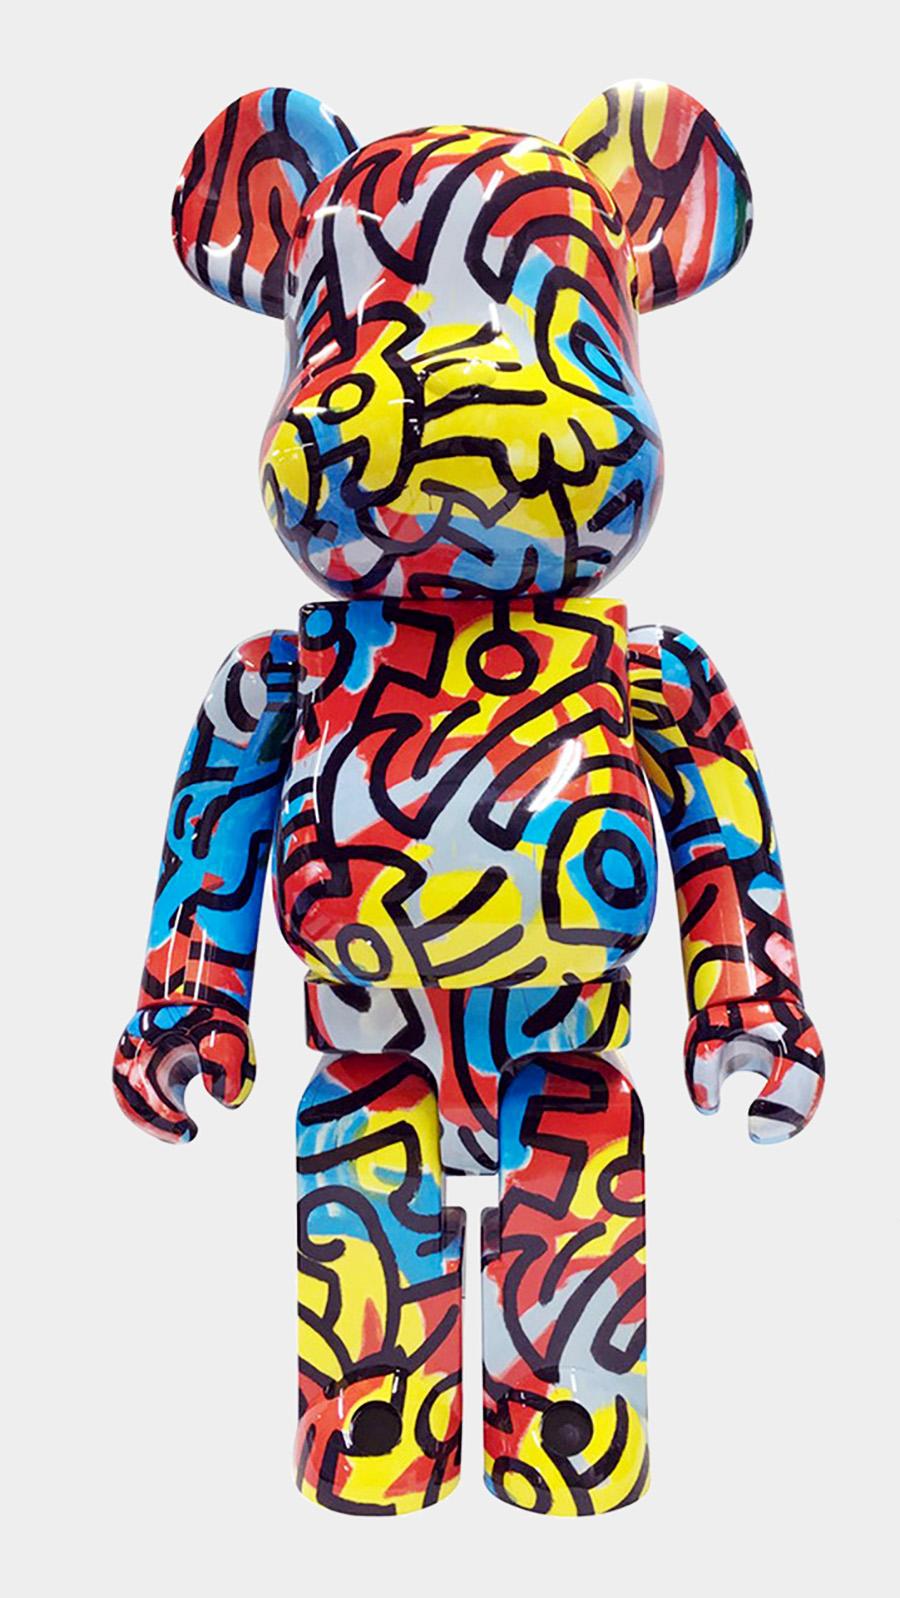 Keith Haring Bearbrick 1000% Companion (Haring designercon BE@RBRICK) - Print by (after) Keith Haring